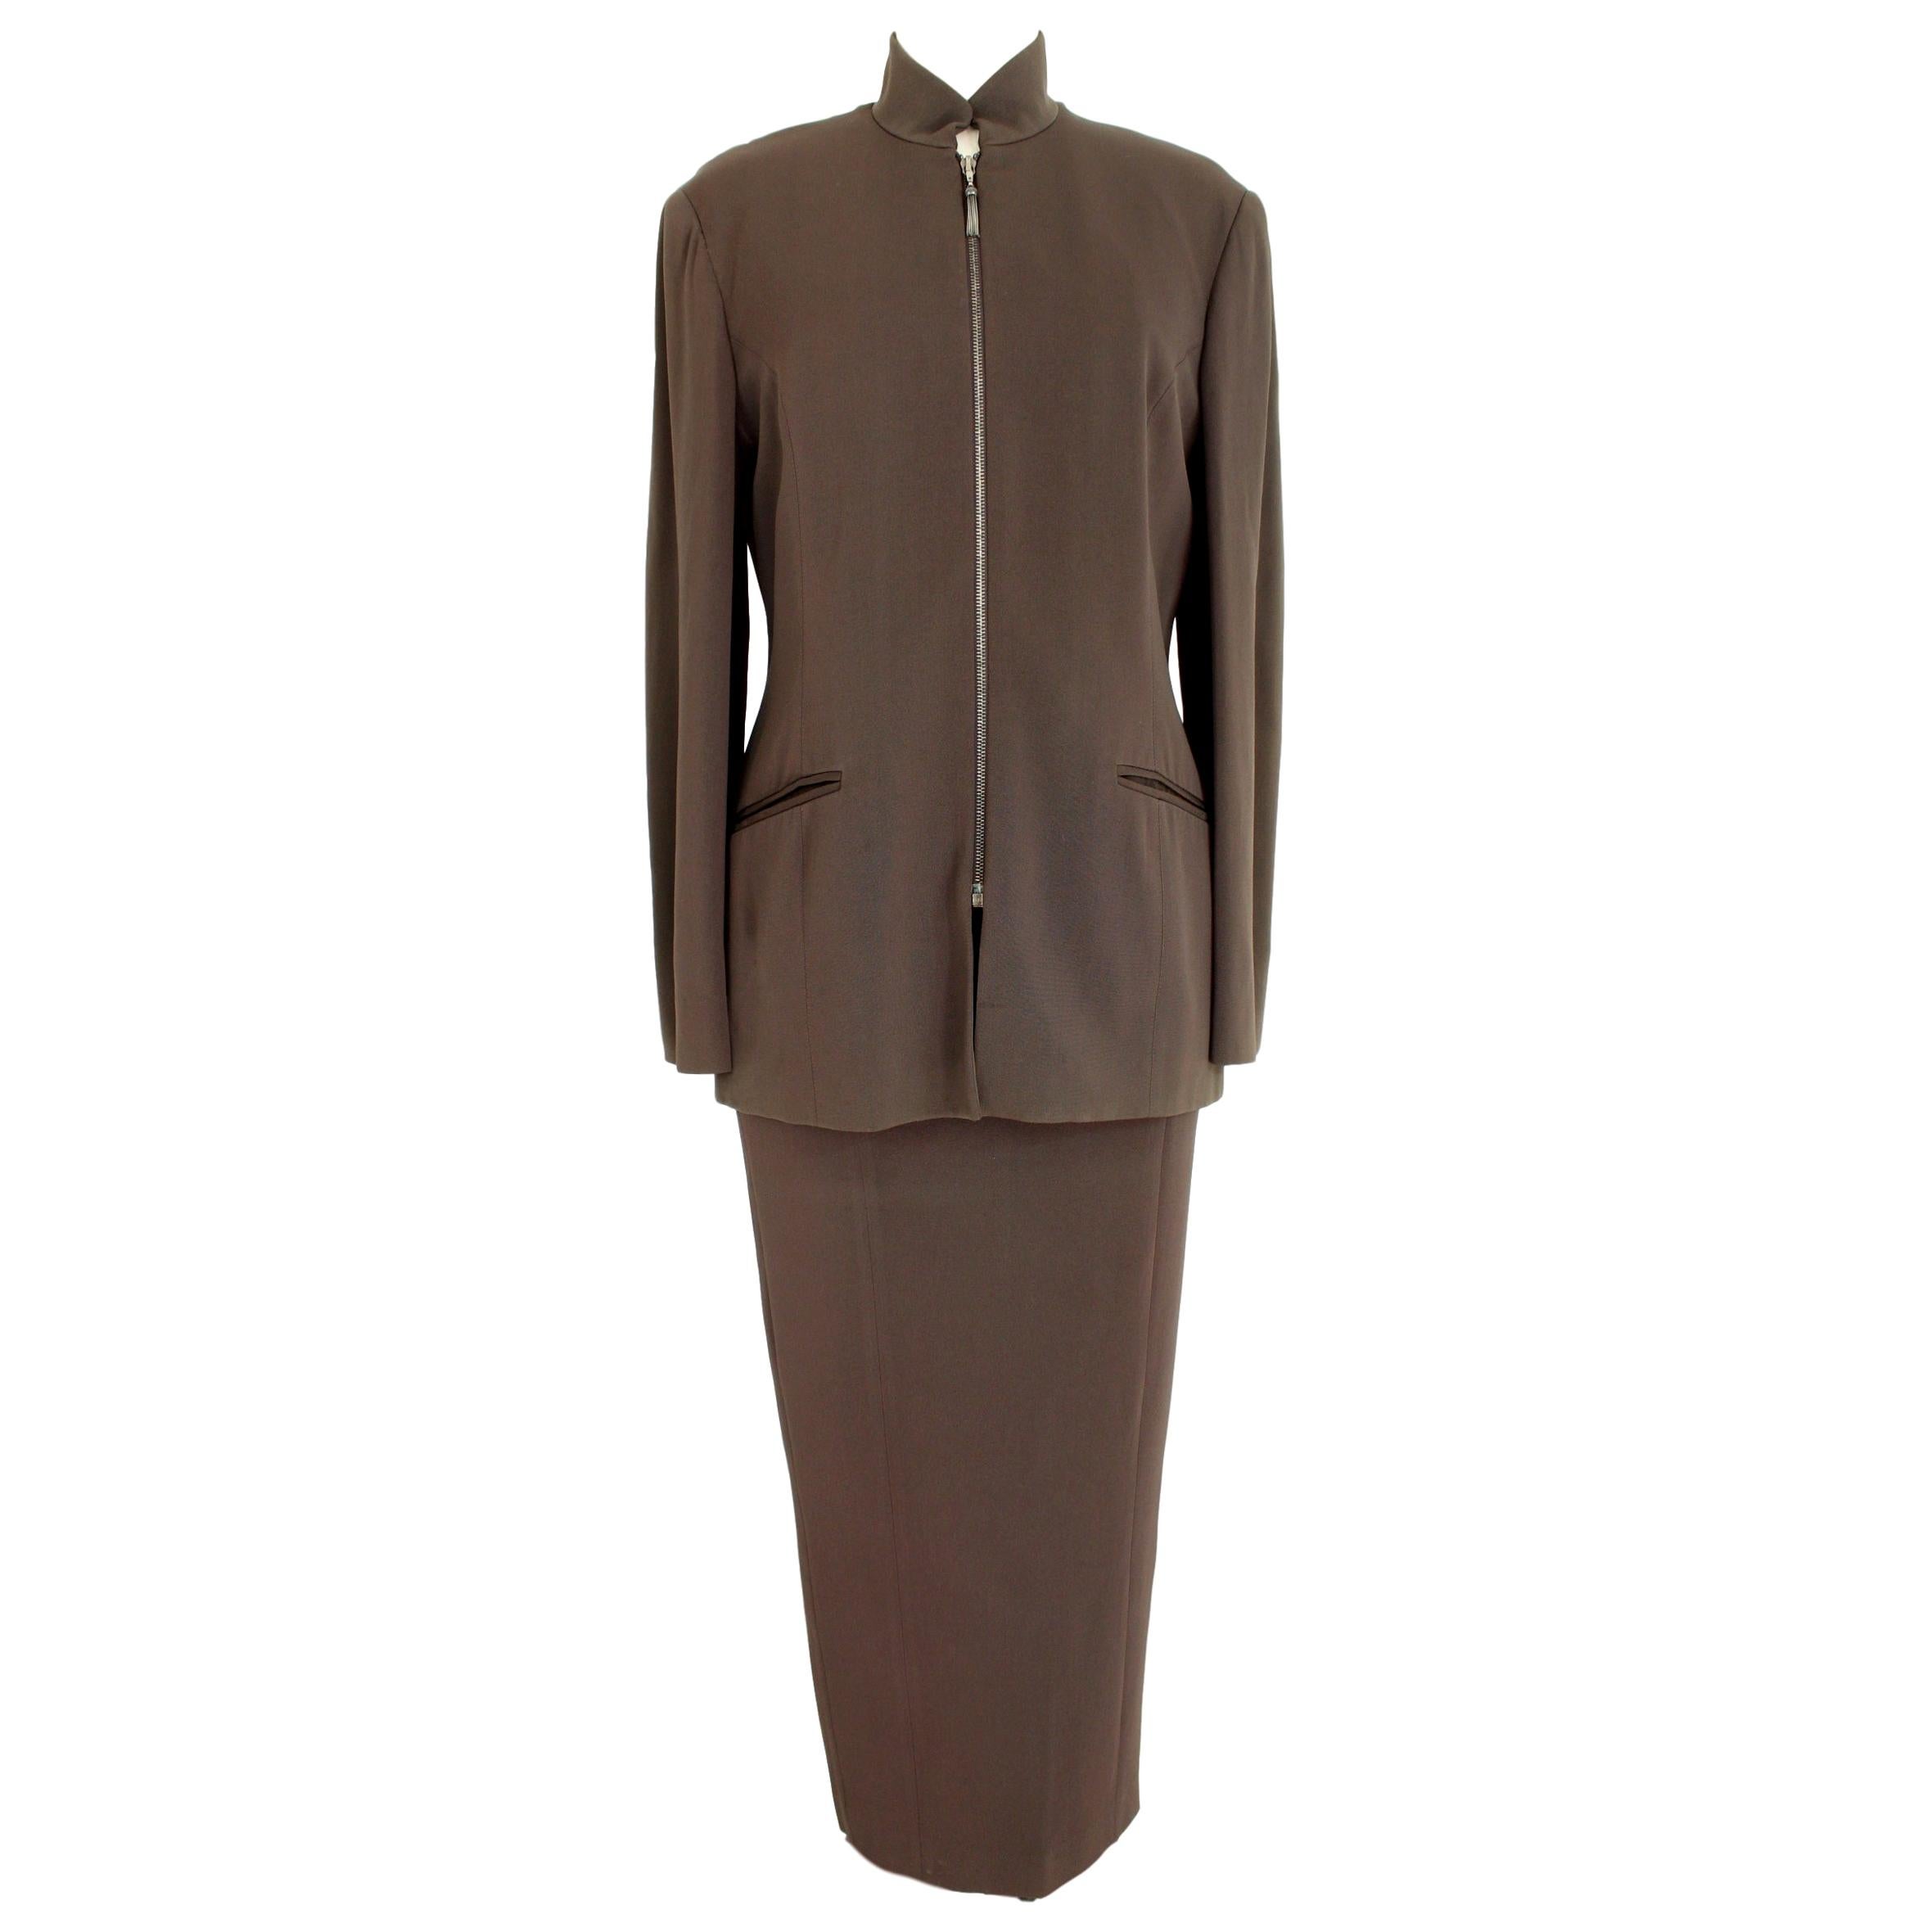 Ozbek Brown Cocktail Long Sheath Suit Dress and Jacket  1990s